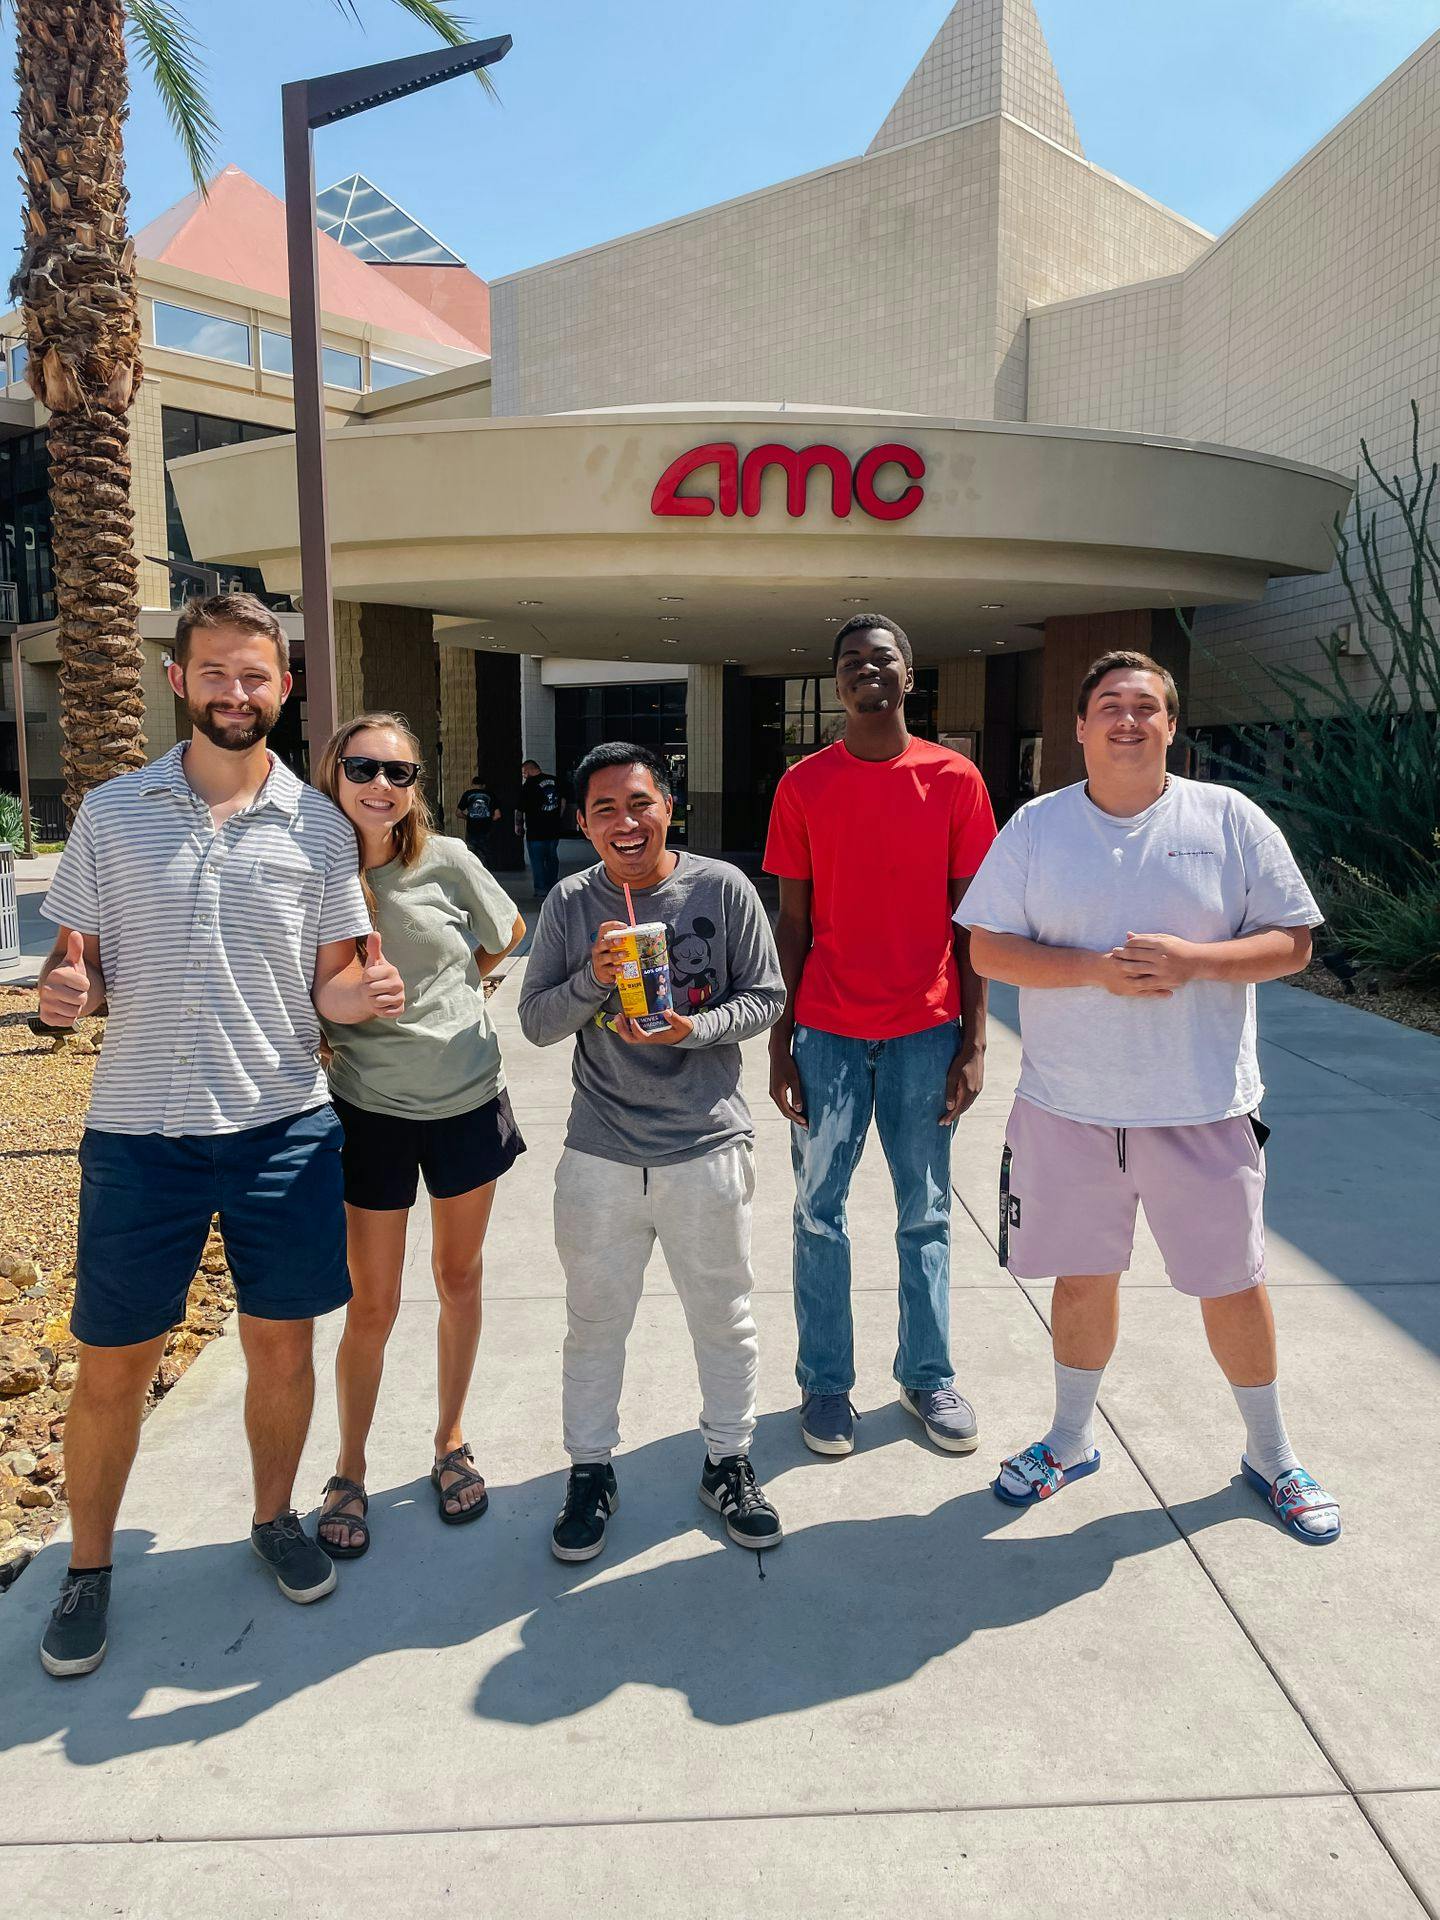 Group of 4 guys and 1 woman outside of a movie theater